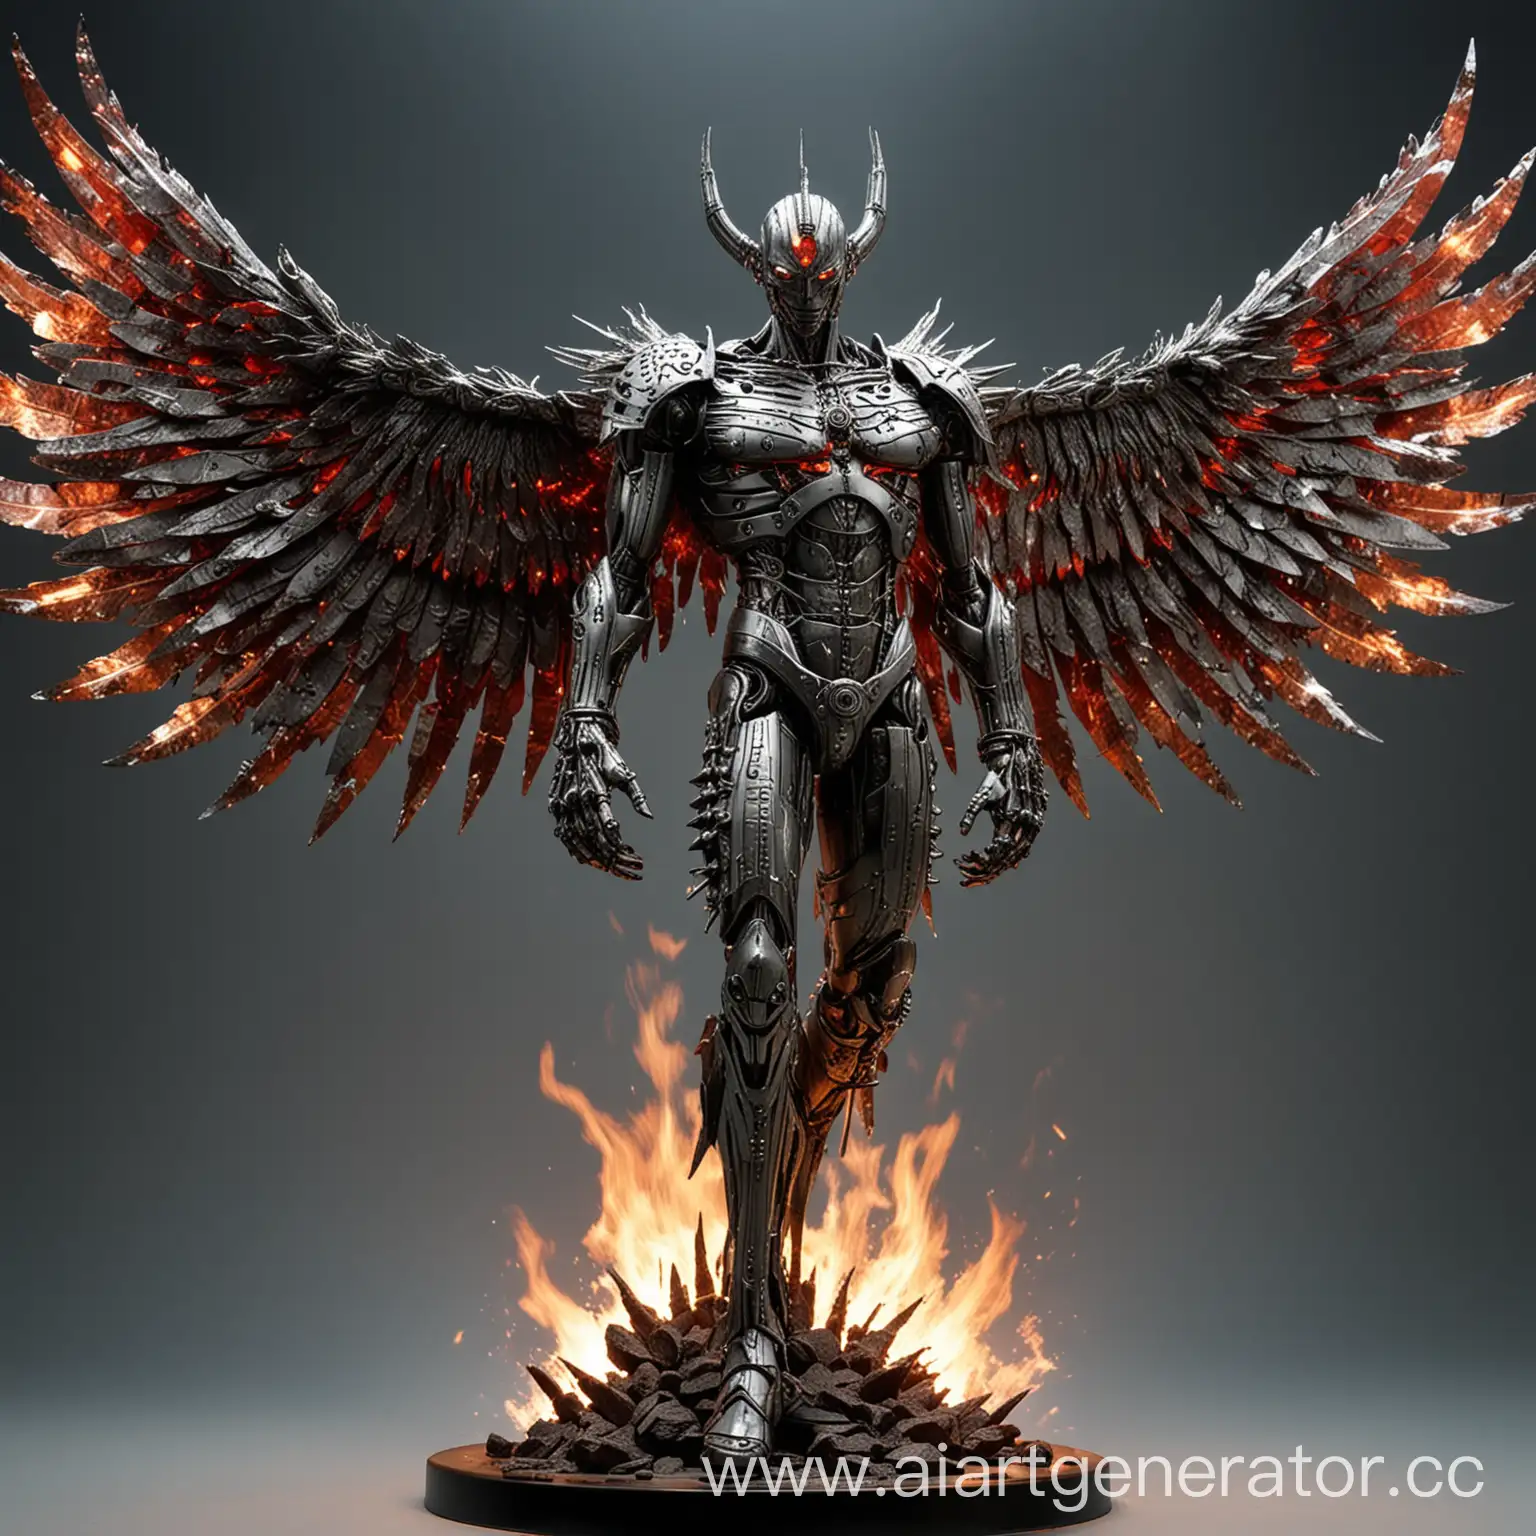 Mechanical-Angel-Stand-with-Fiery-Patterns-and-Metal-Wings